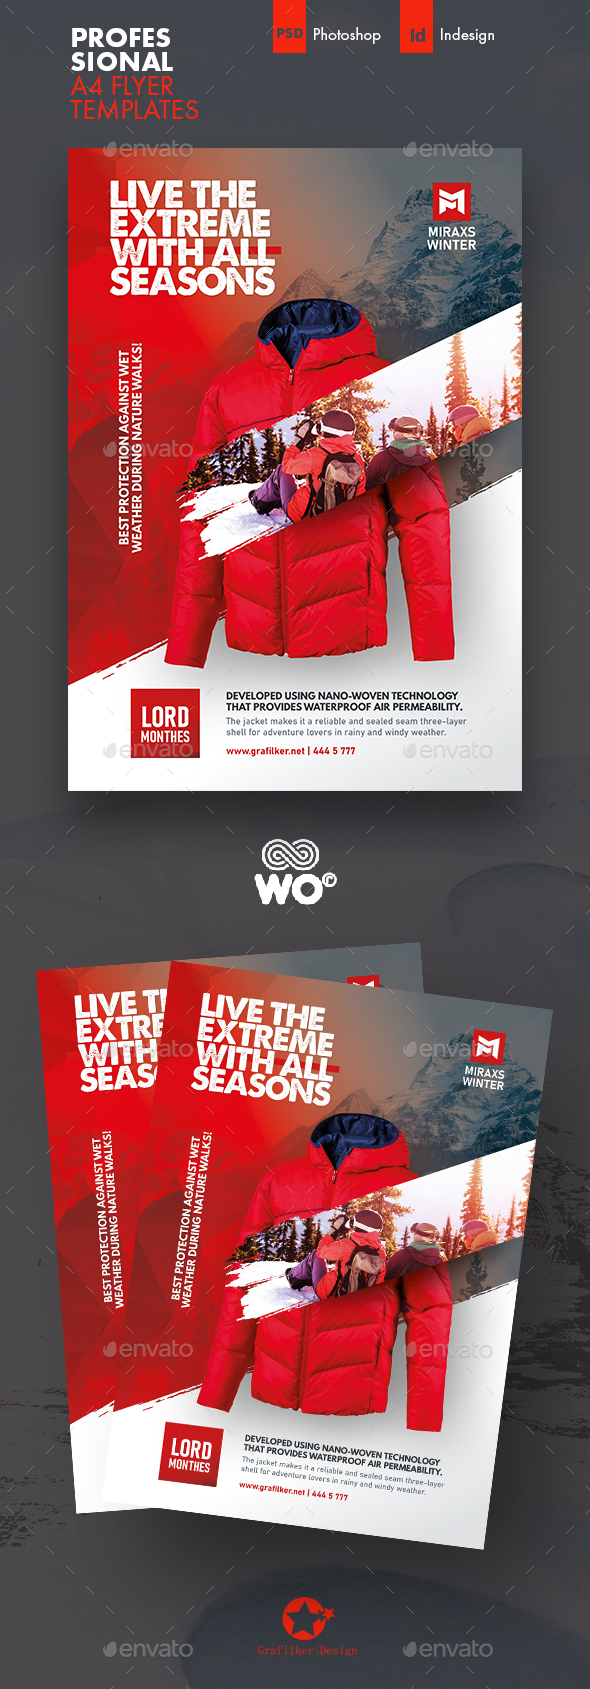 [DOWNLOAD]Shopping Flyer Templates